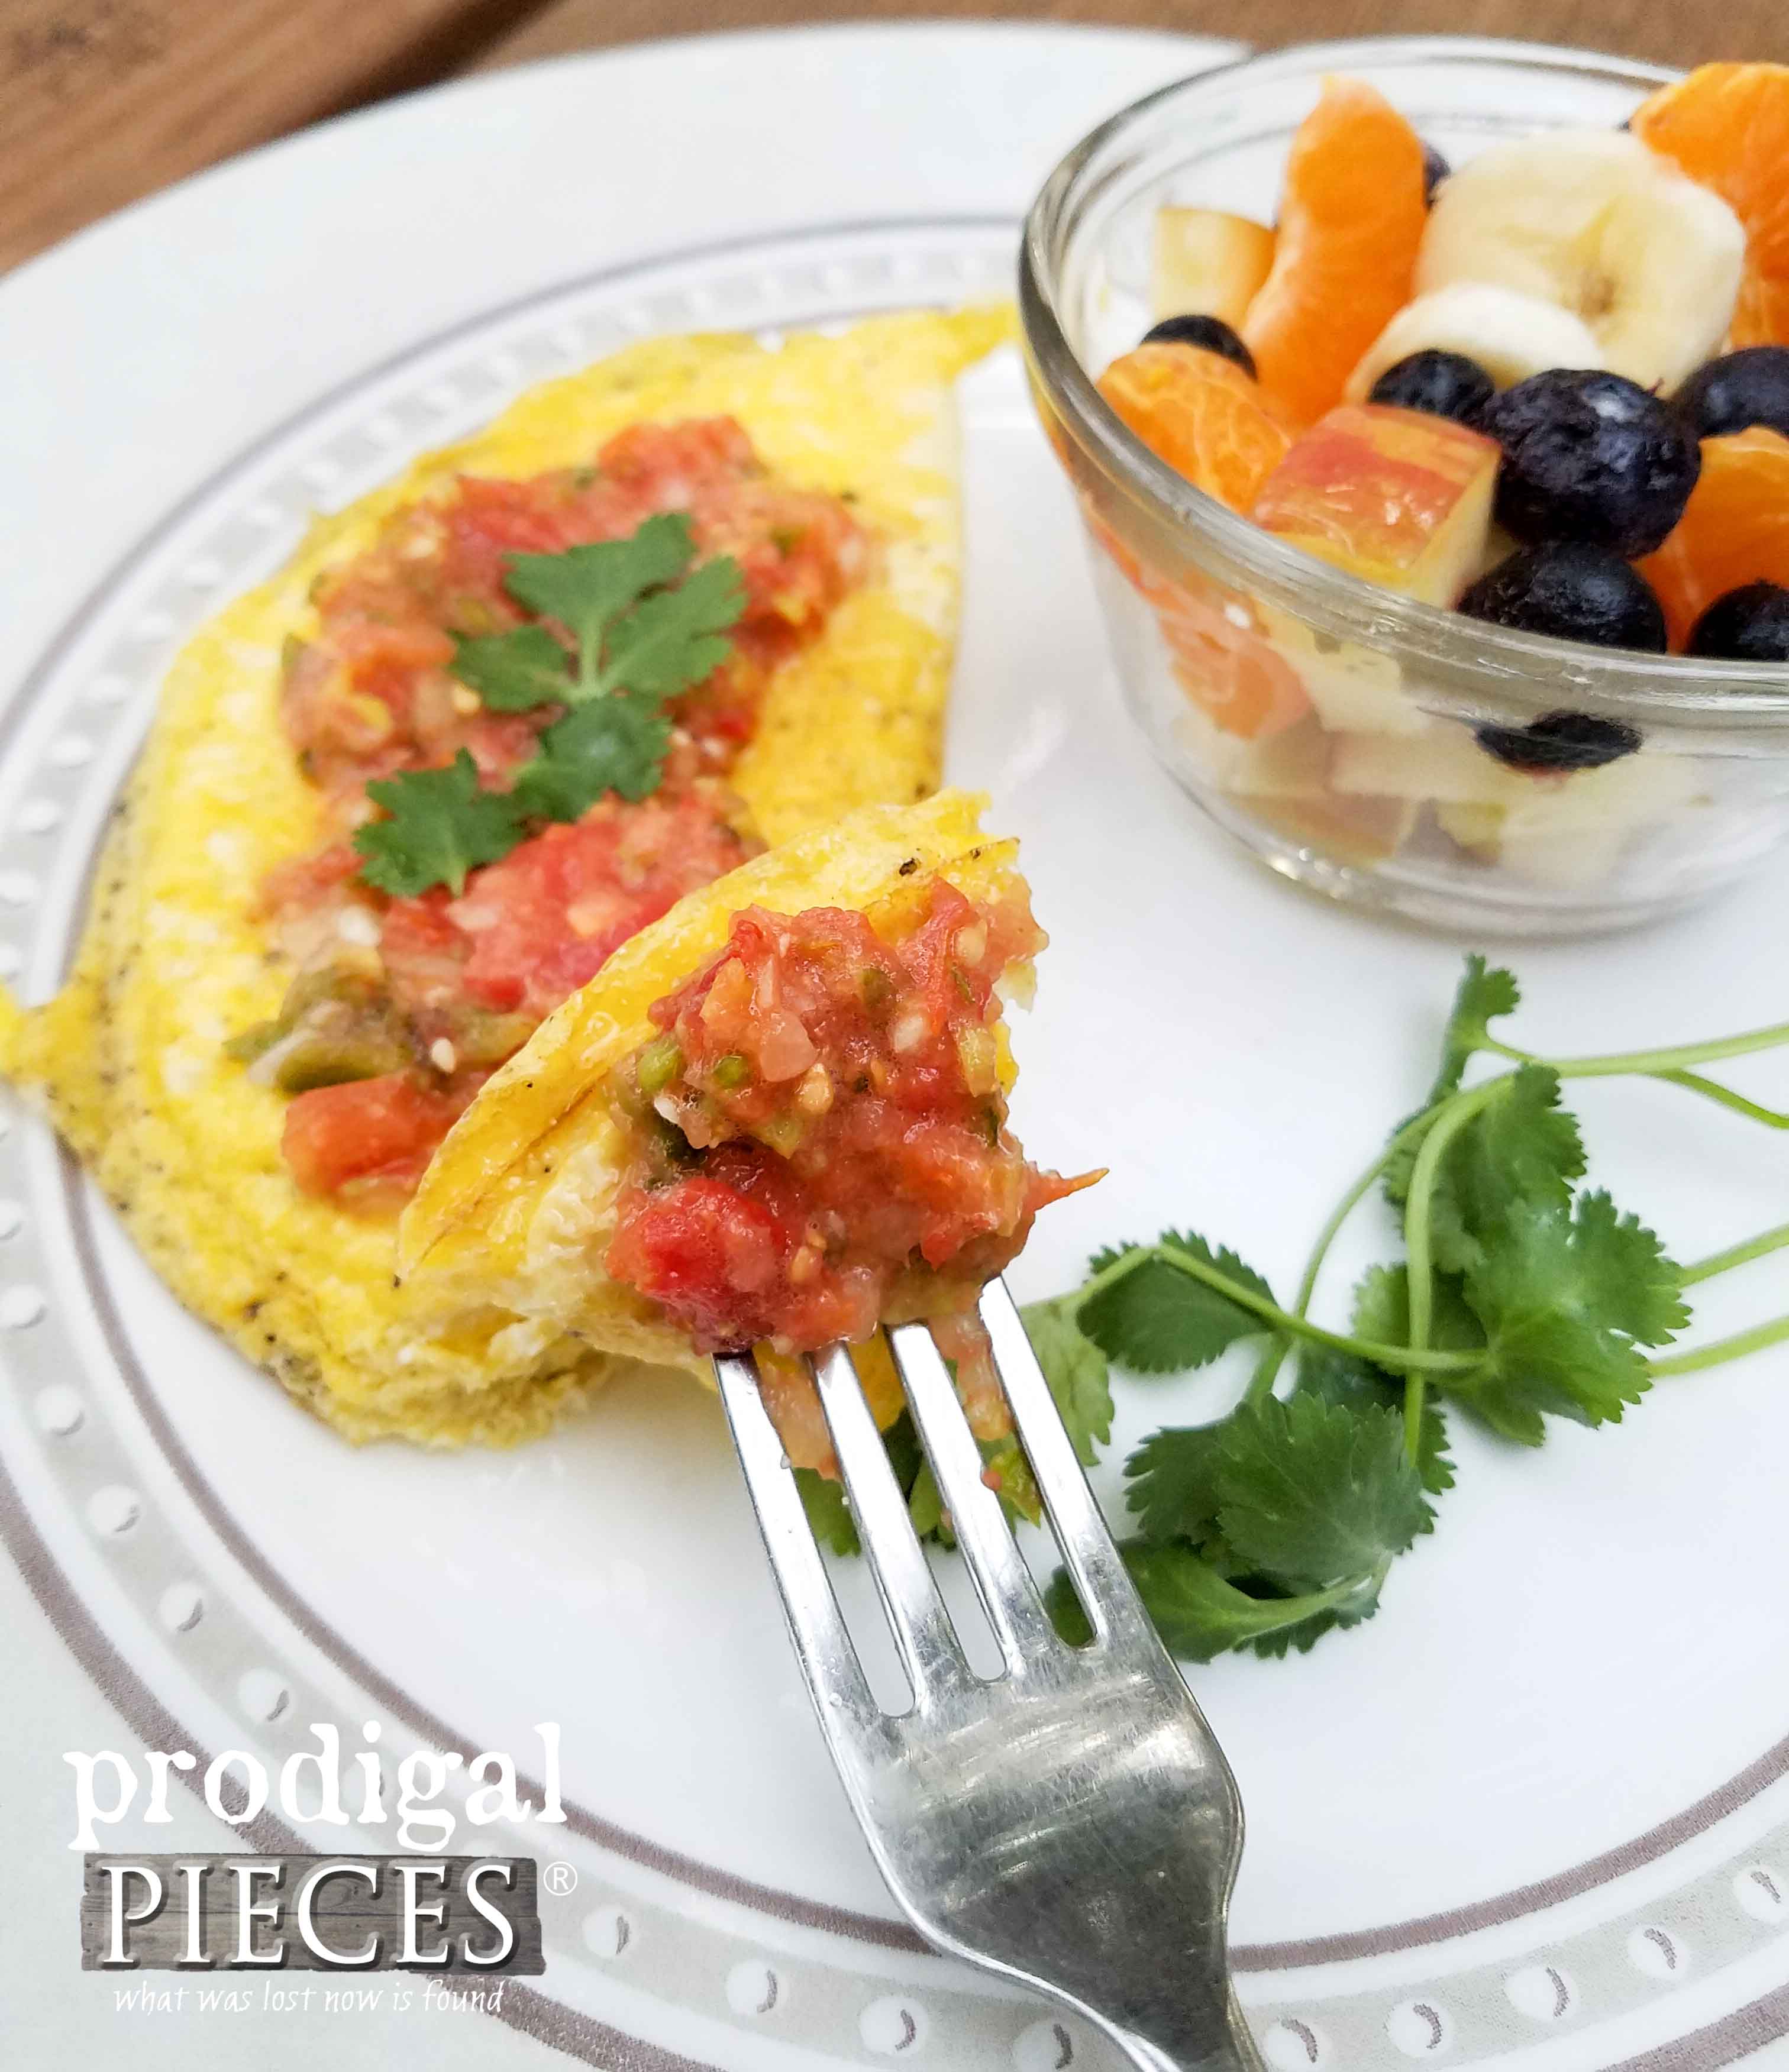 Fermented Salsa on Fried Egg with Fruit Salad for a Nourishing Breakfast by Prodigal Pieces | www.prodigalpieces.com